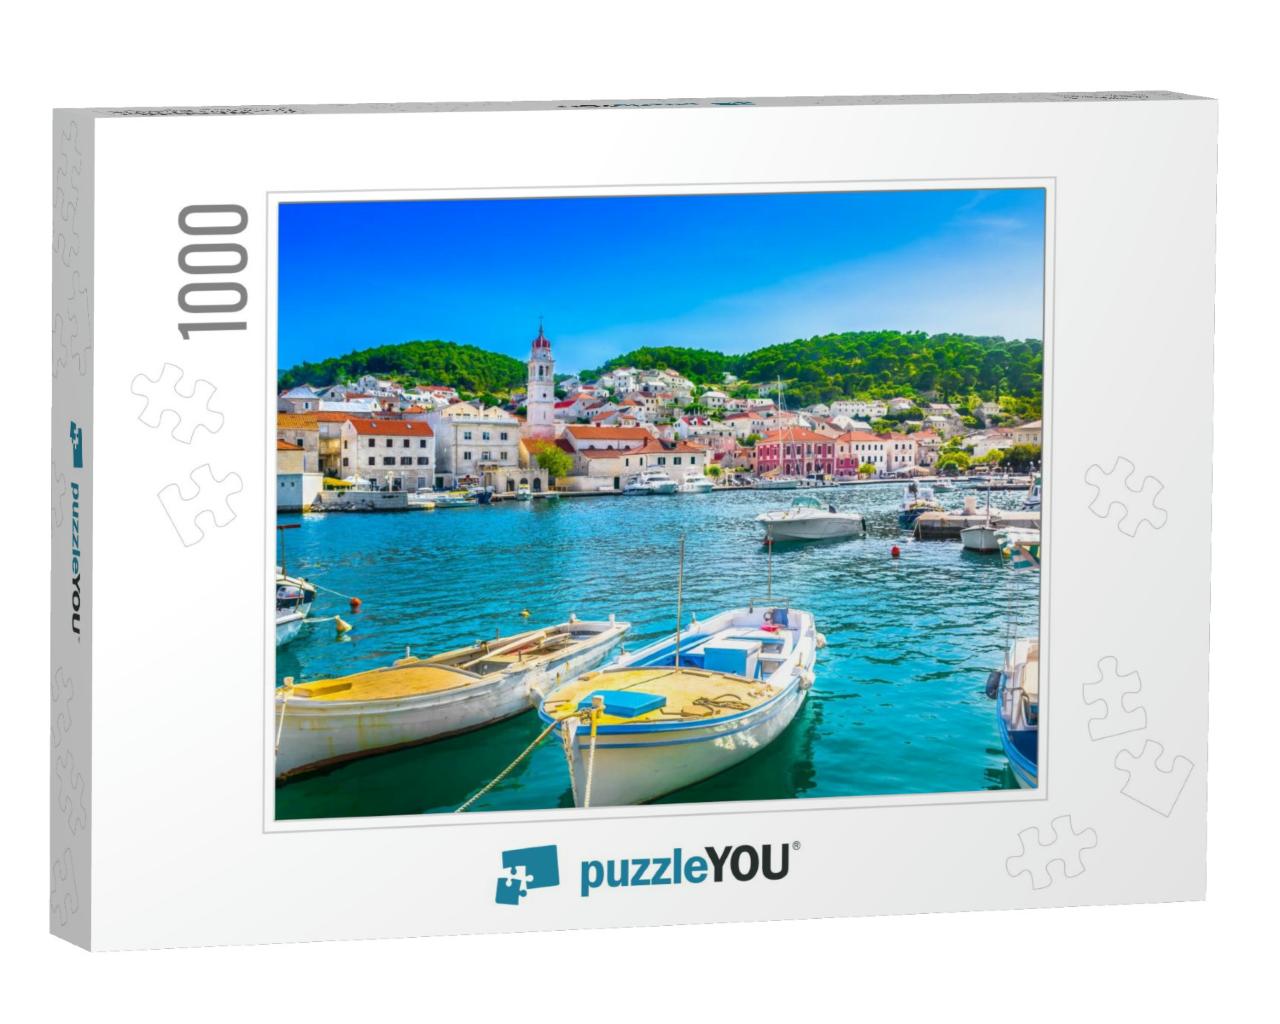 Seafront Scenery of Small Mediterranean Village Pucisca o... Jigsaw Puzzle with 1000 pieces